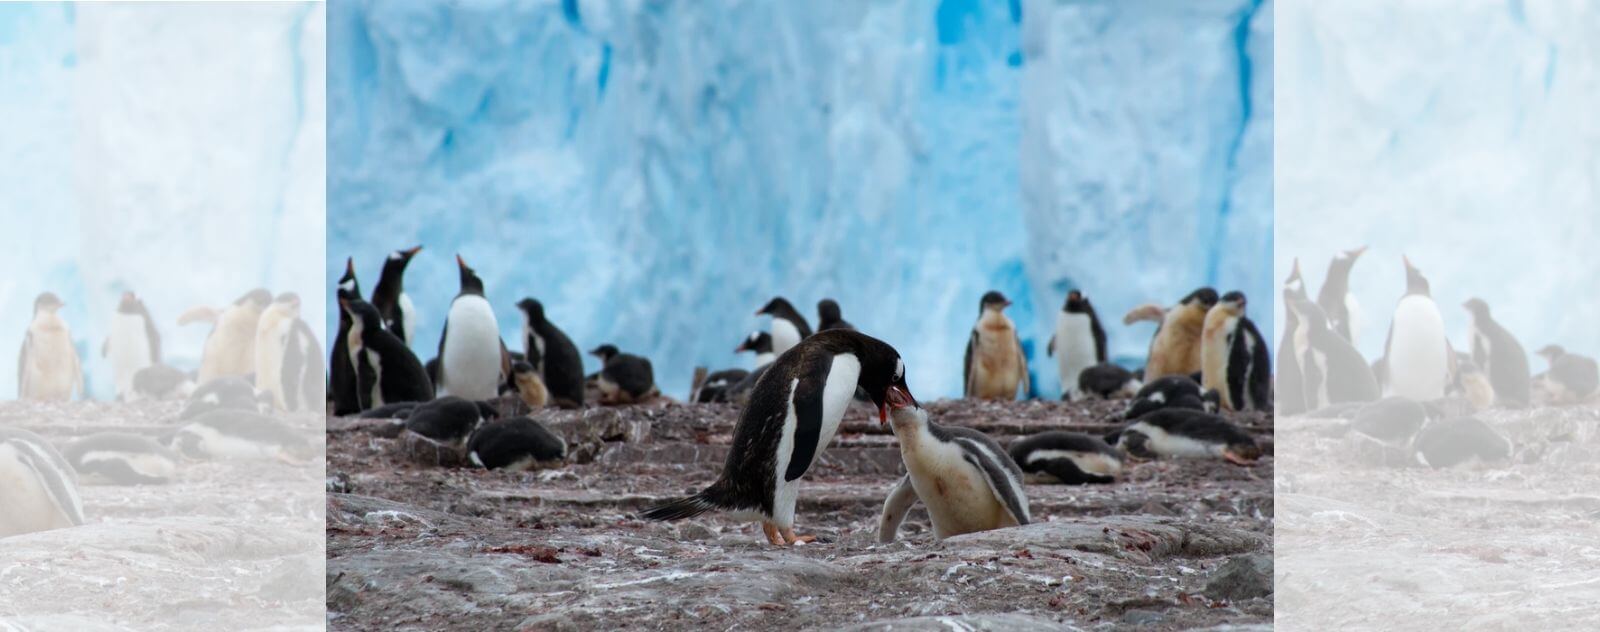 Penguin Feeding its Chicks in their Colony on Pack Ice and Ice